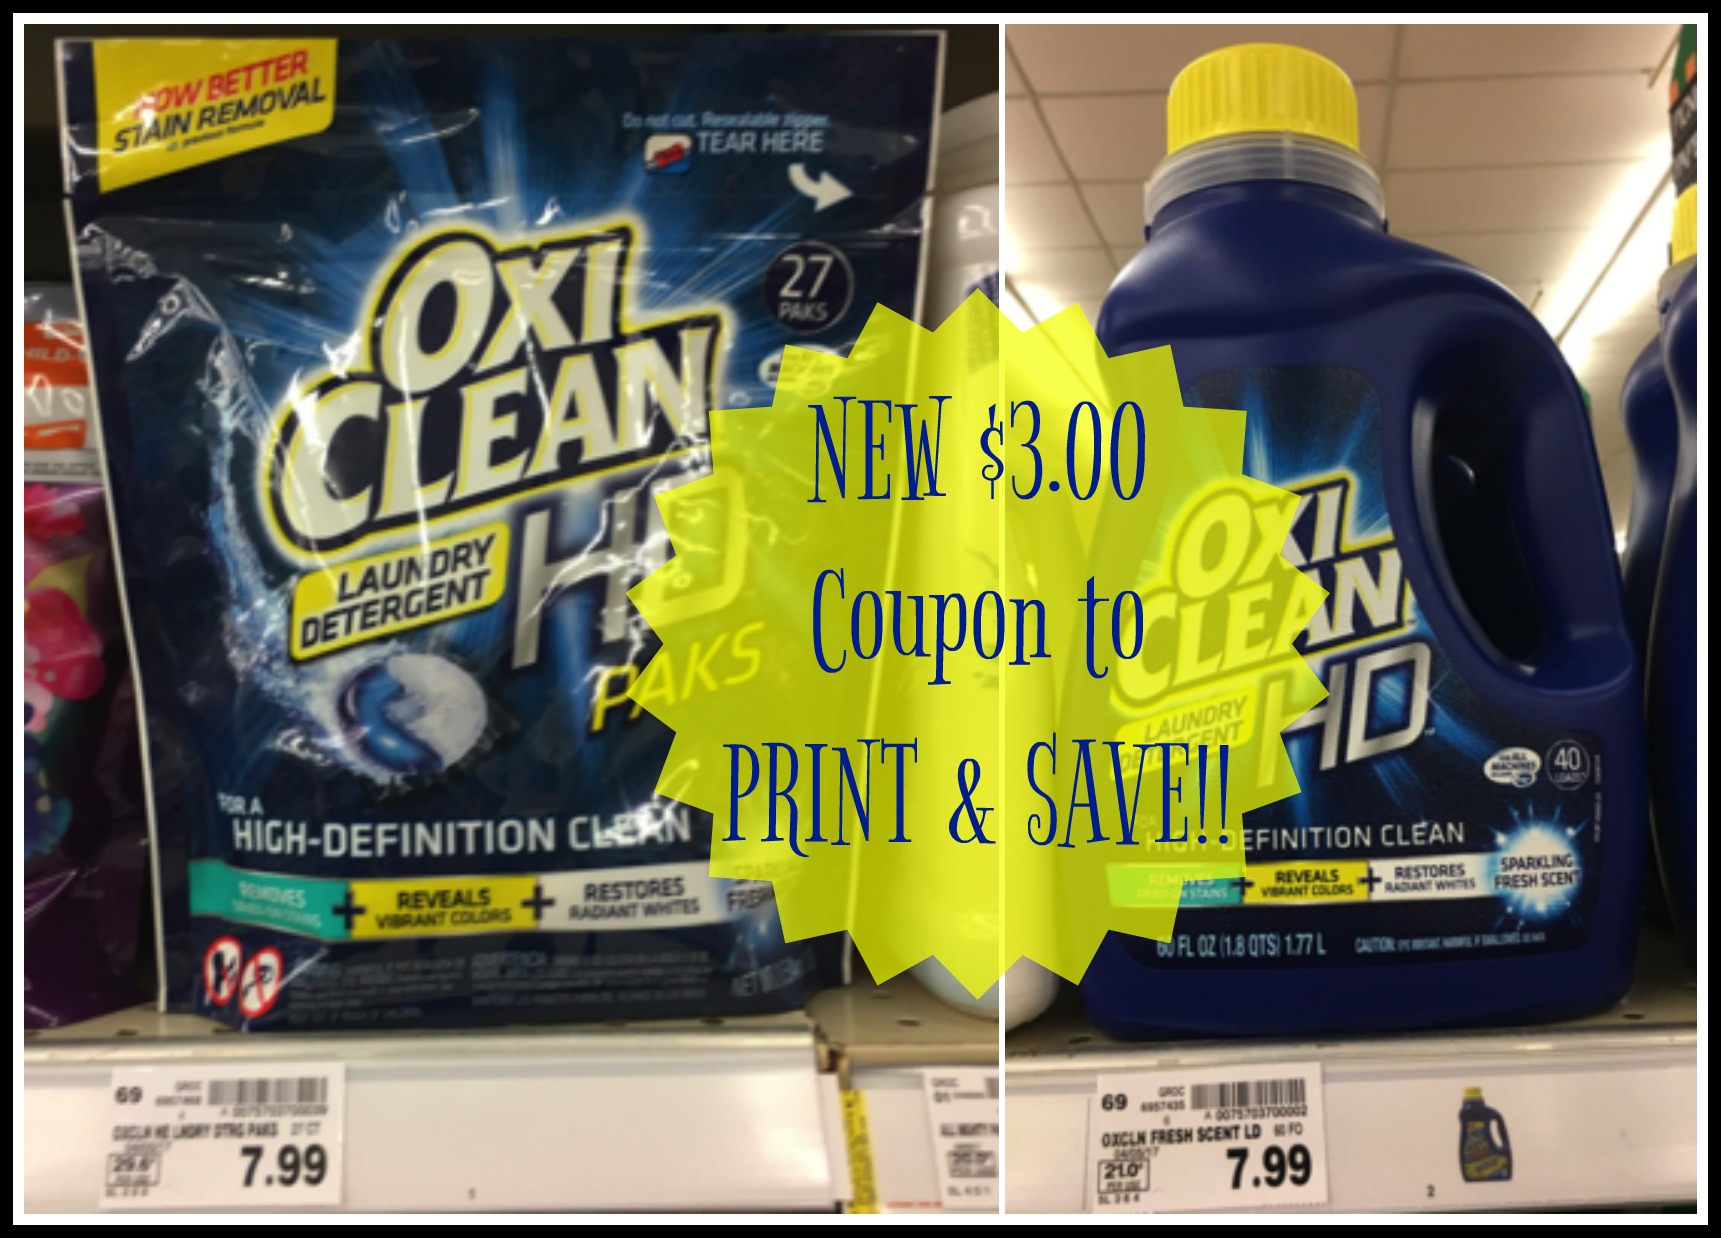 oxiclean detergent Image